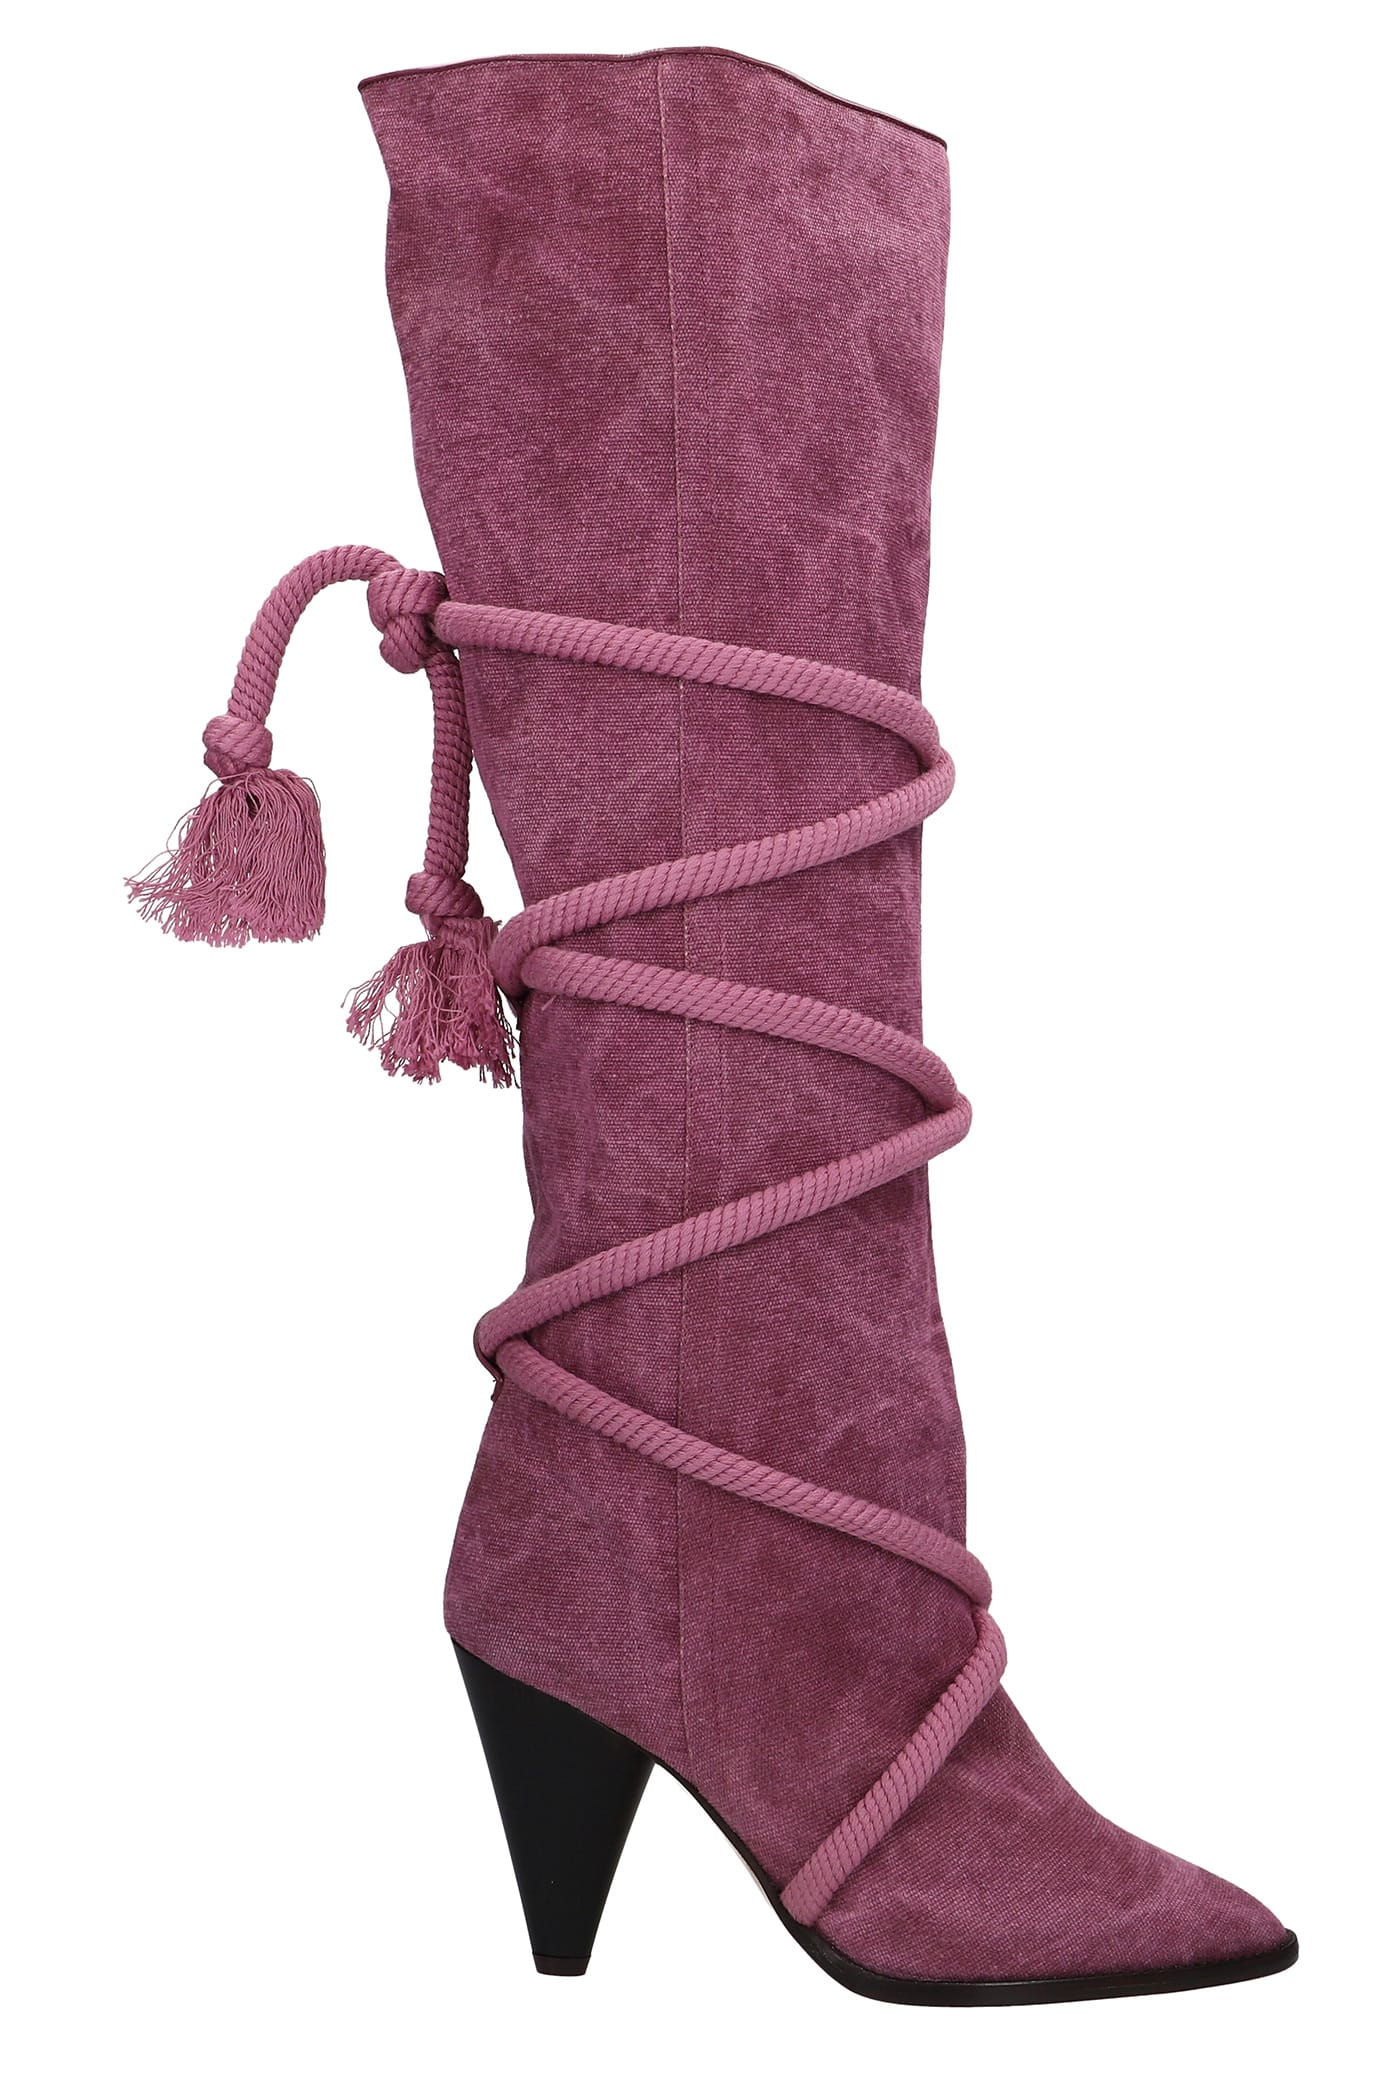 Isabel Marant Lophie High Heels Boots In Fuxia Canvas